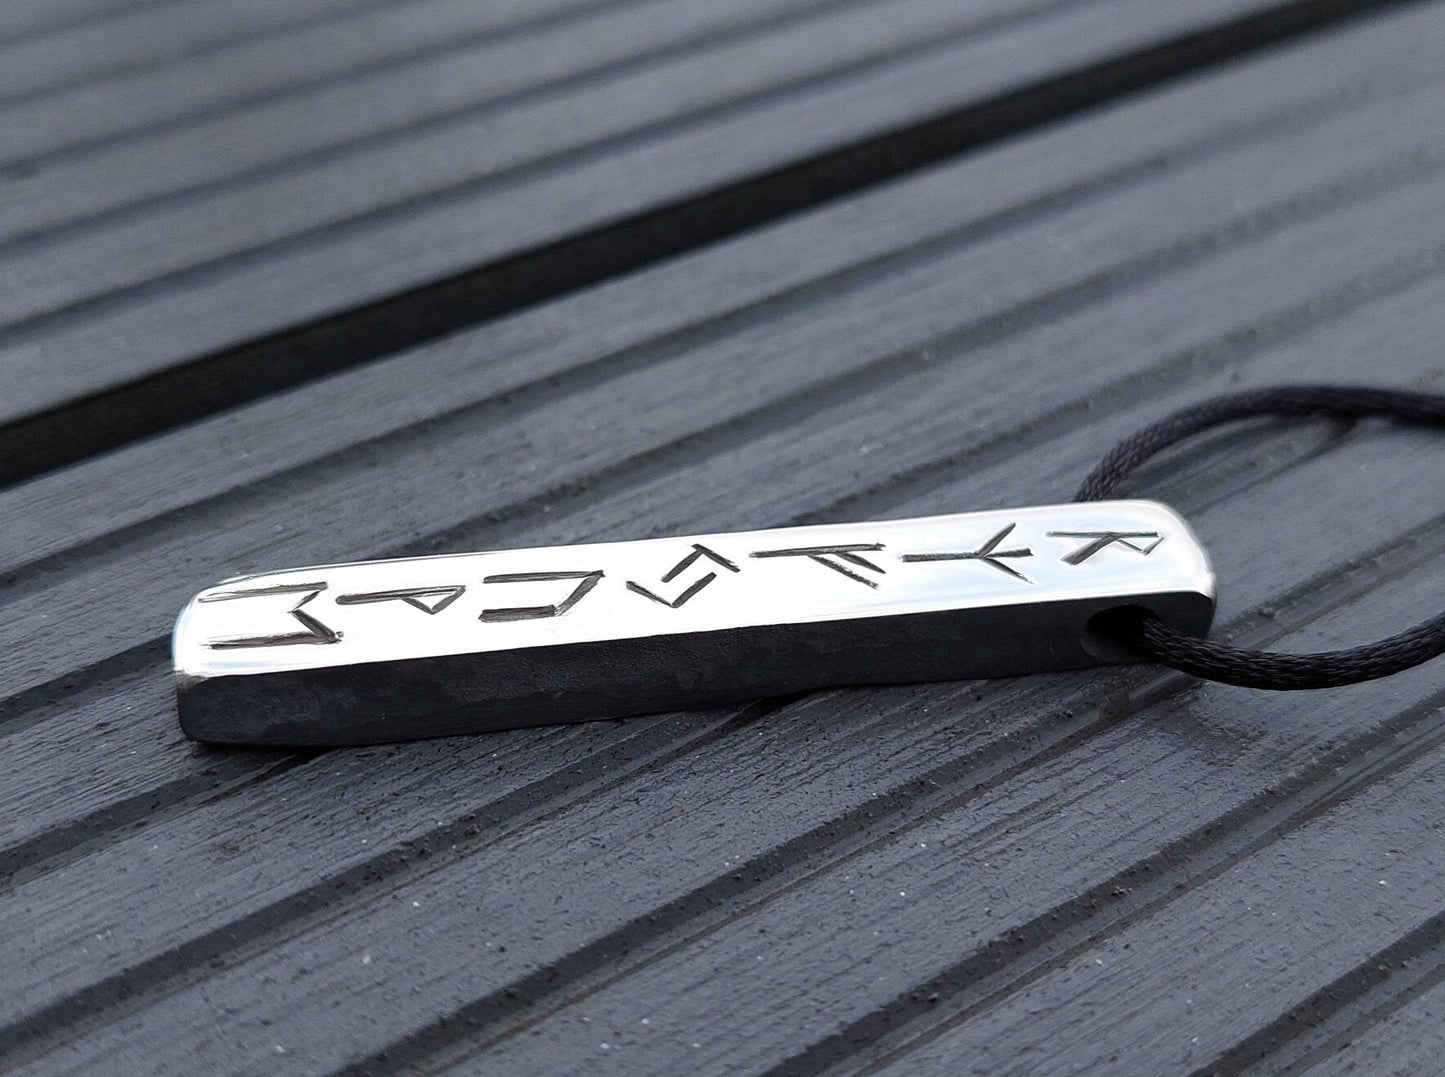 Powerful and real rune amulet for wealth, money and protection, sterling silver pendant